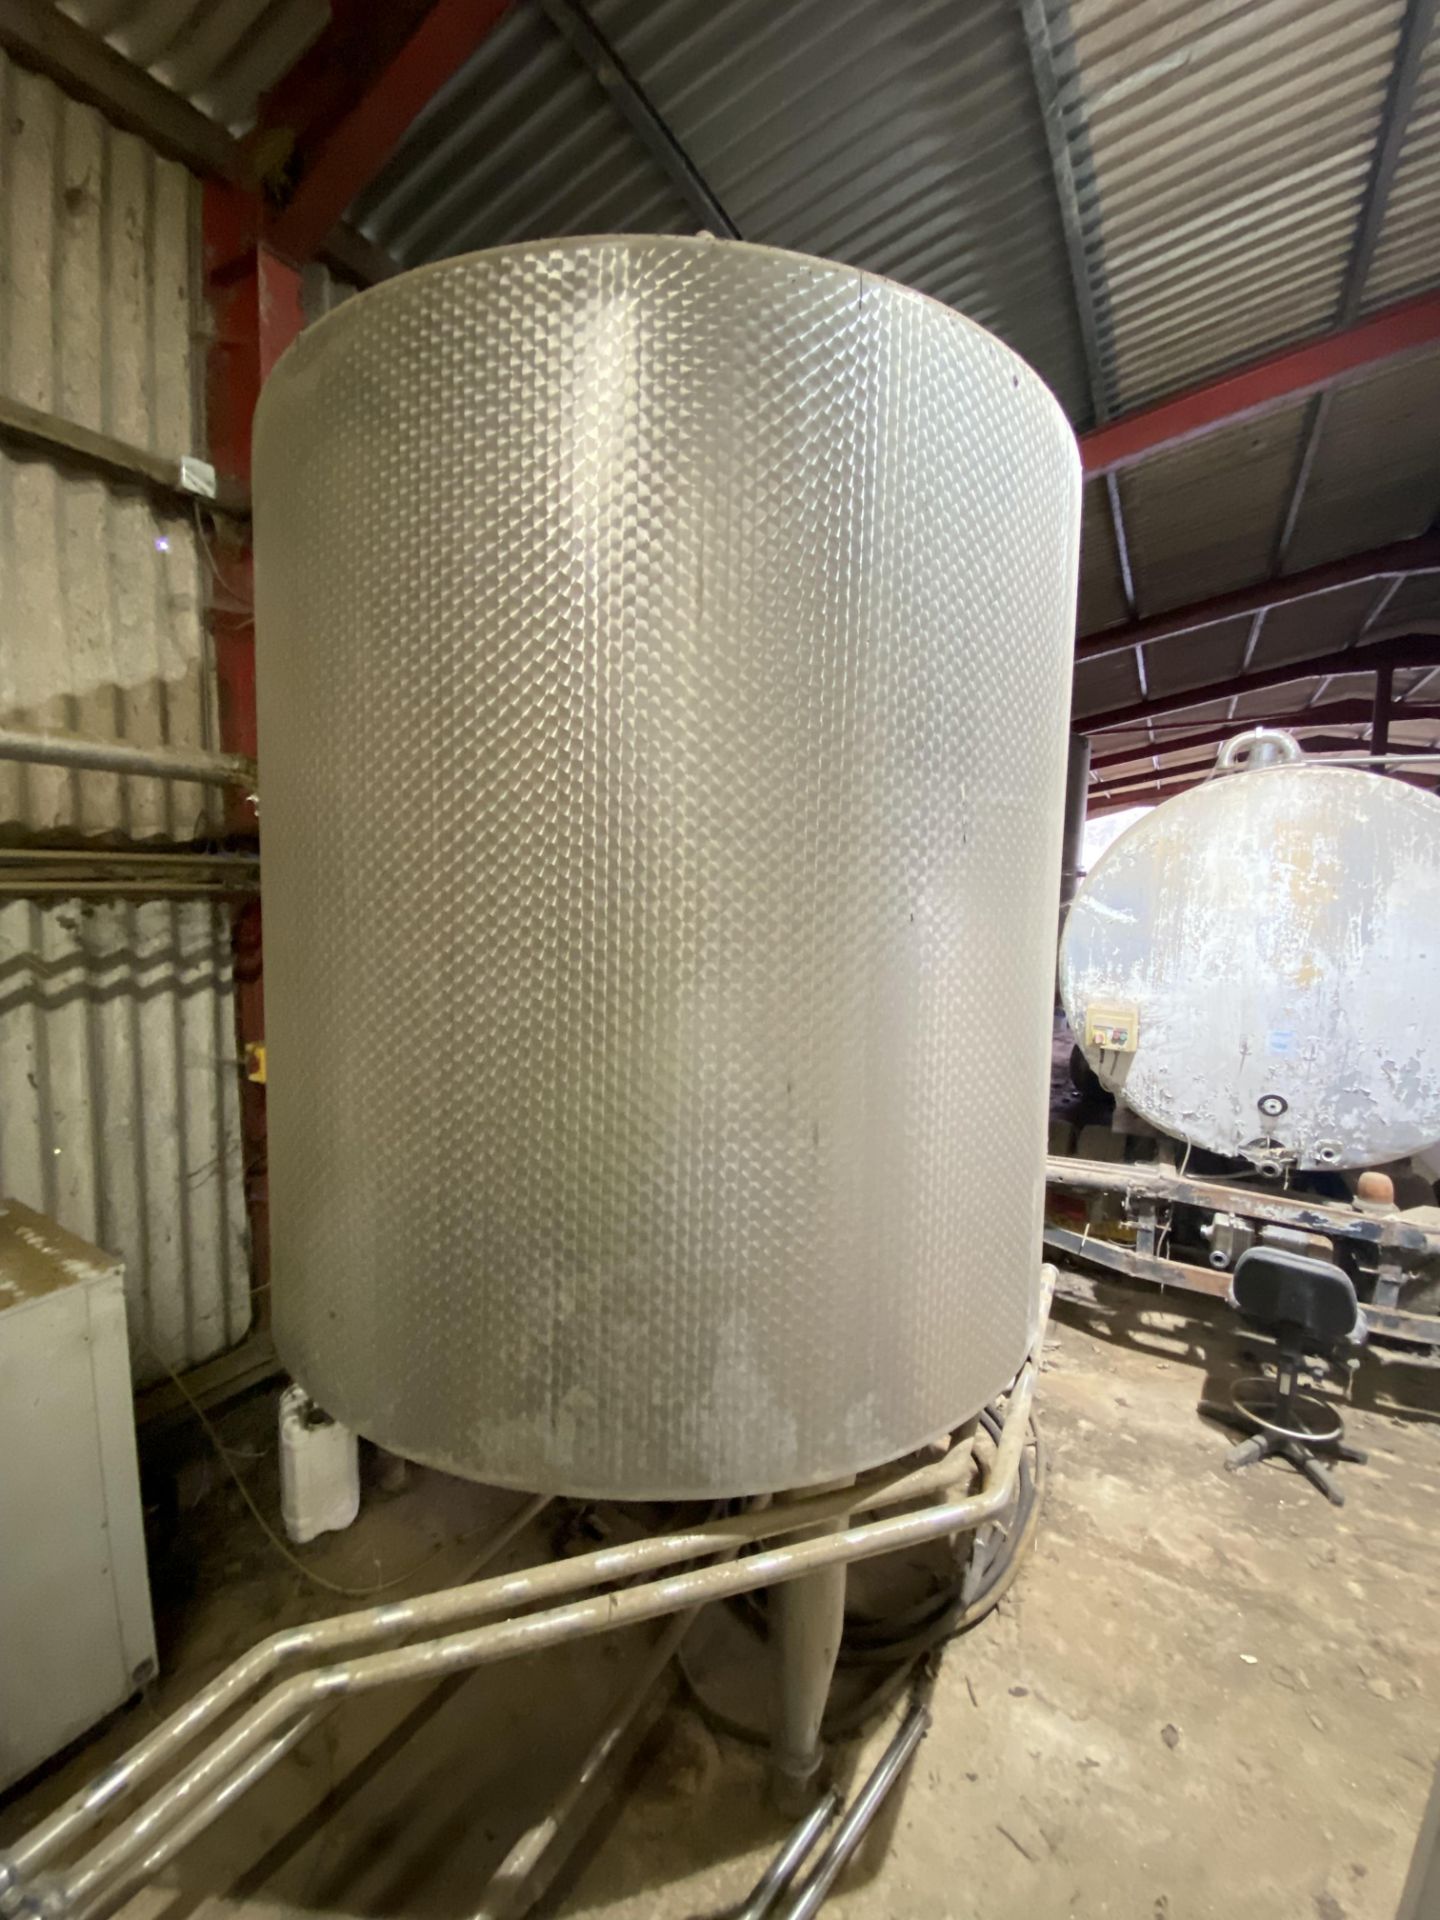 Pasilac SBQ VERTICAL STAINLESS STEEL MIXING VESSEL, code no. 733.16, serial no. 54.754/01.2, approx. - Bild 3 aus 4